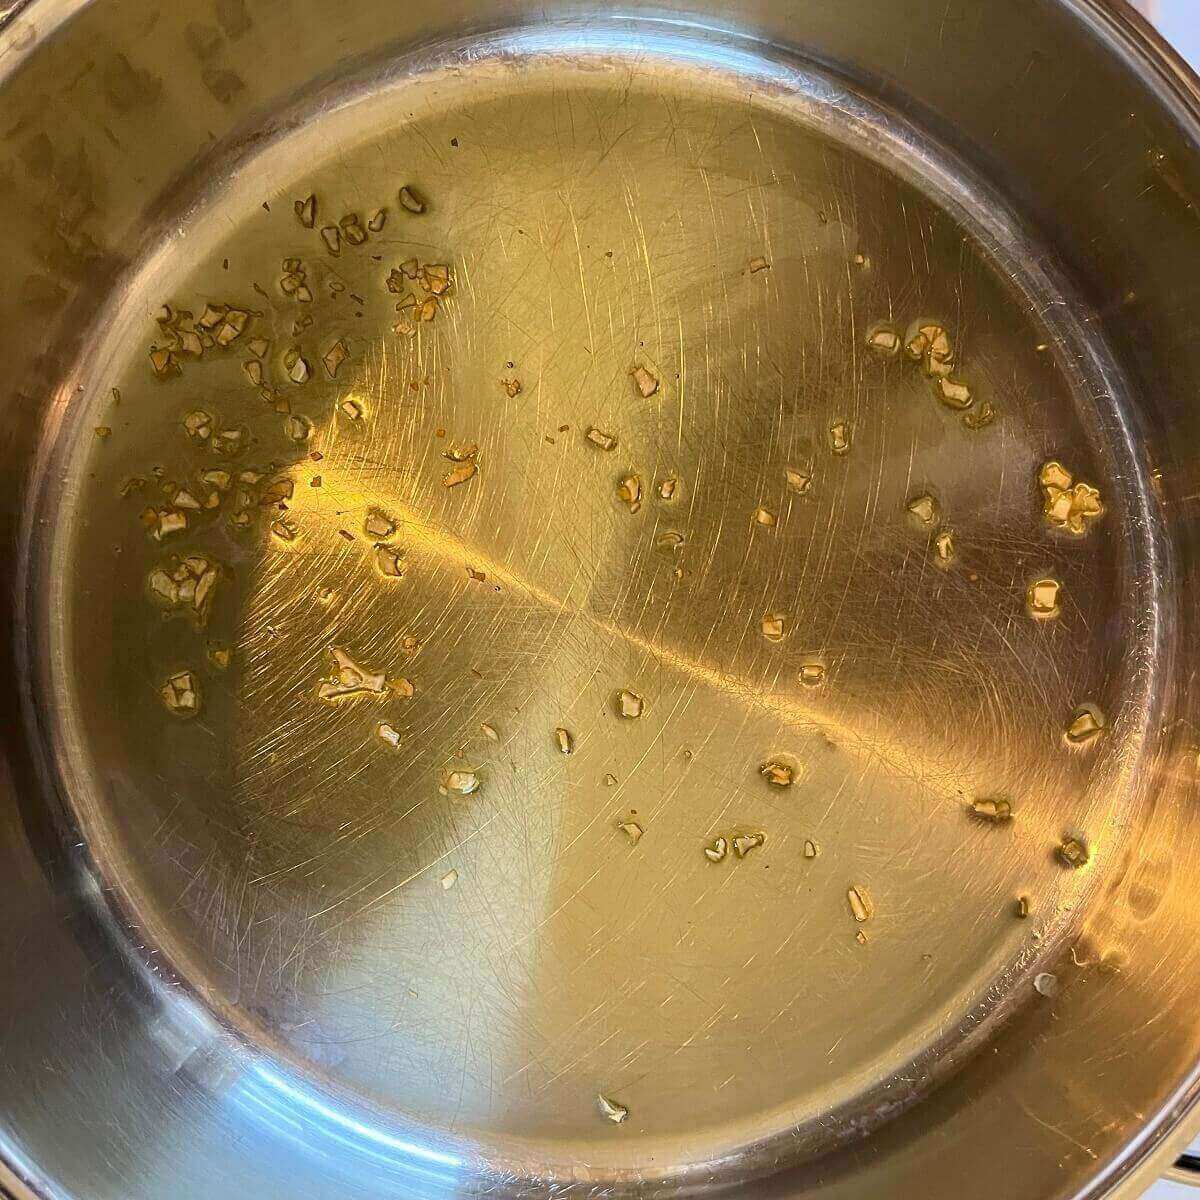 Chopped garlic and olive oil in a metal pan.